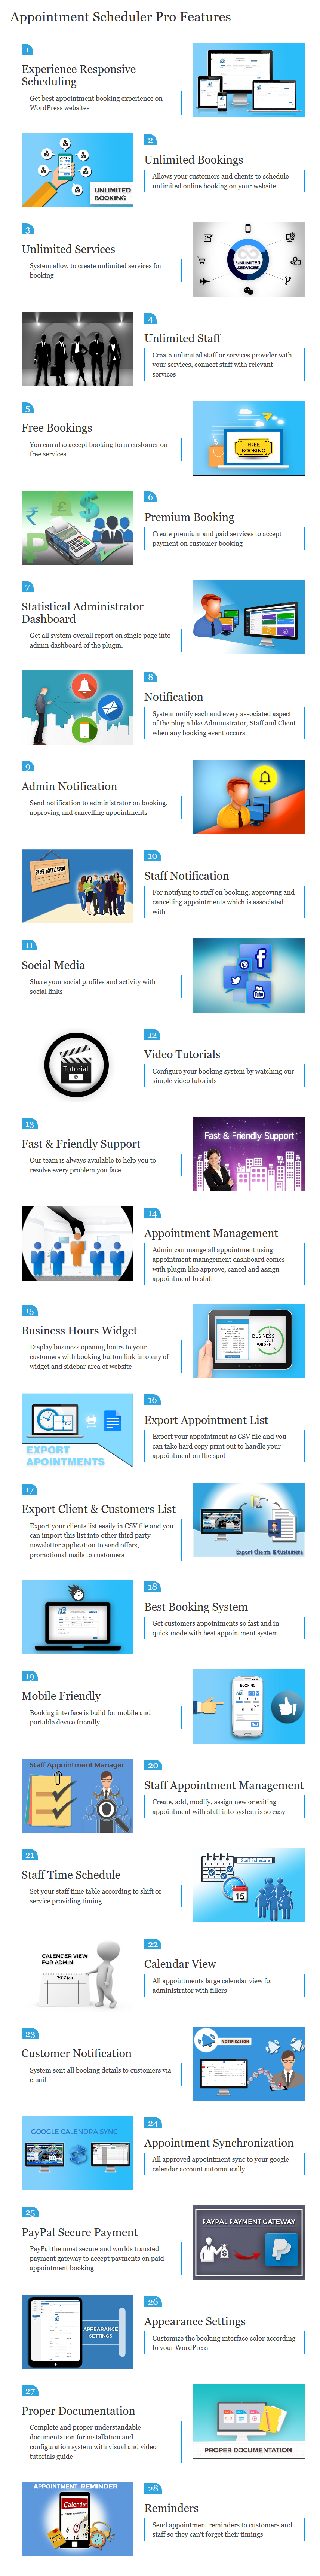 appointment-scheduler-pro